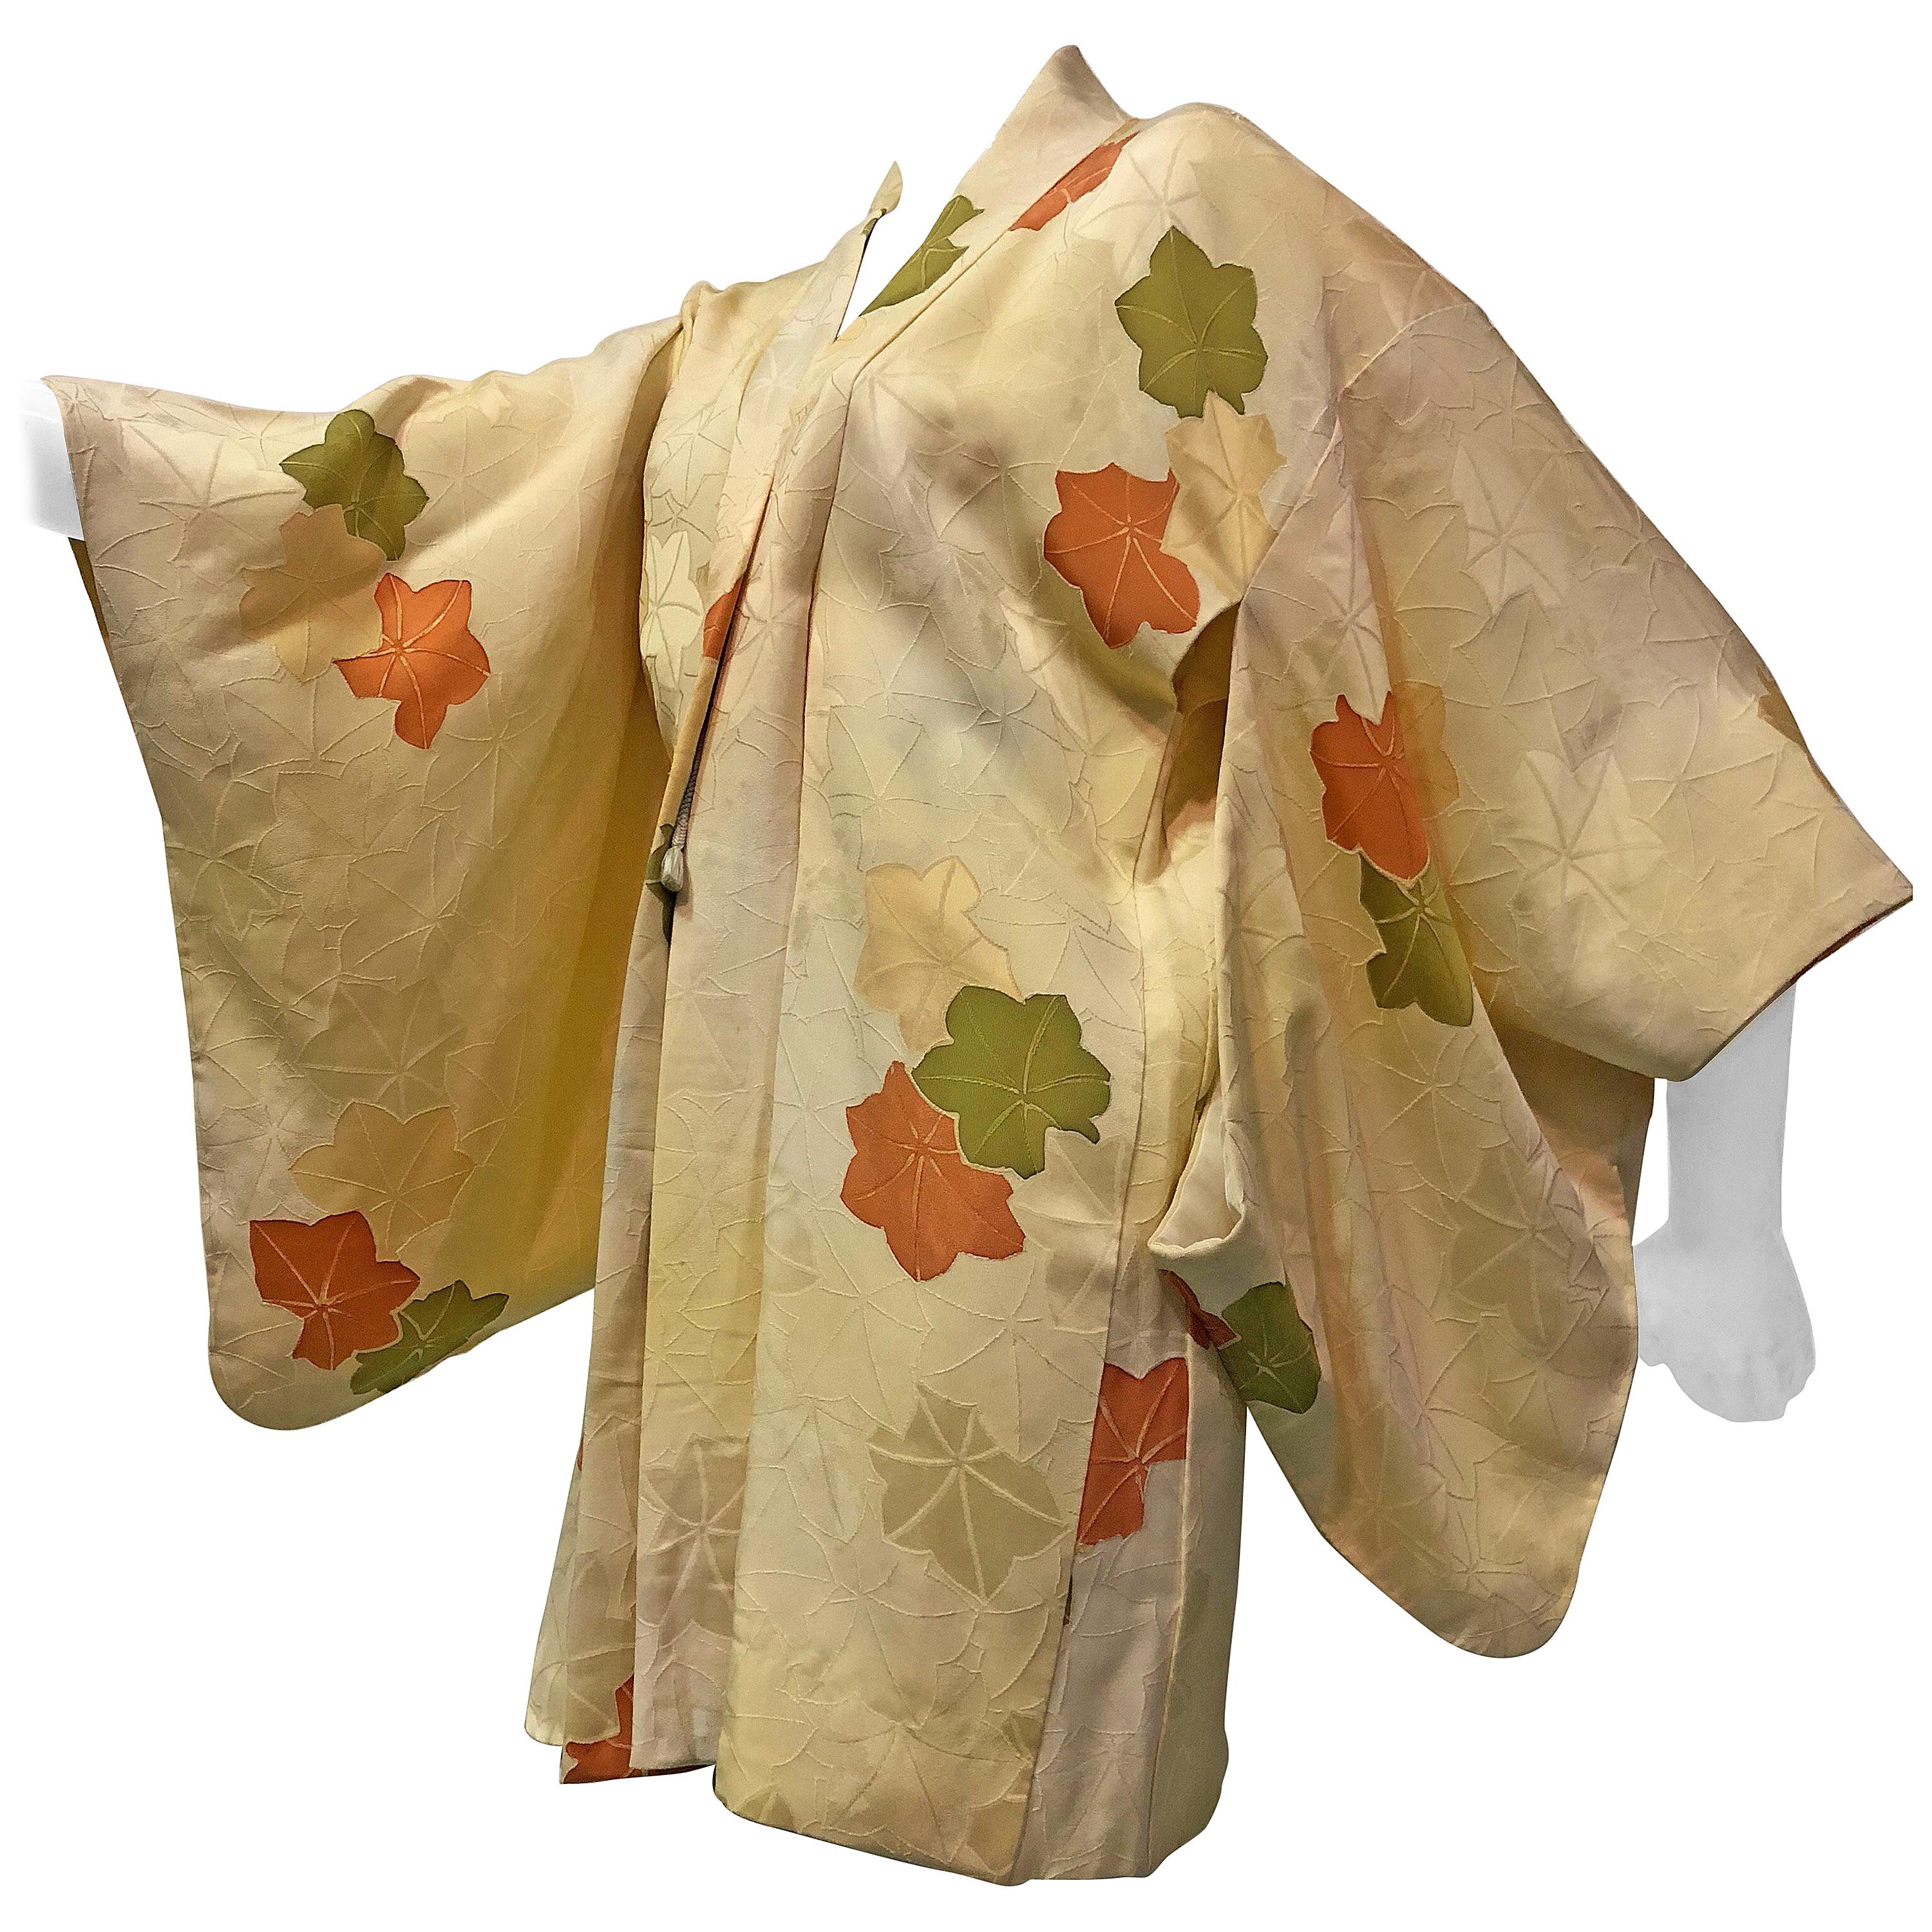 1960s Japanese Silk Floral Print Kimono With Front Tie Closure